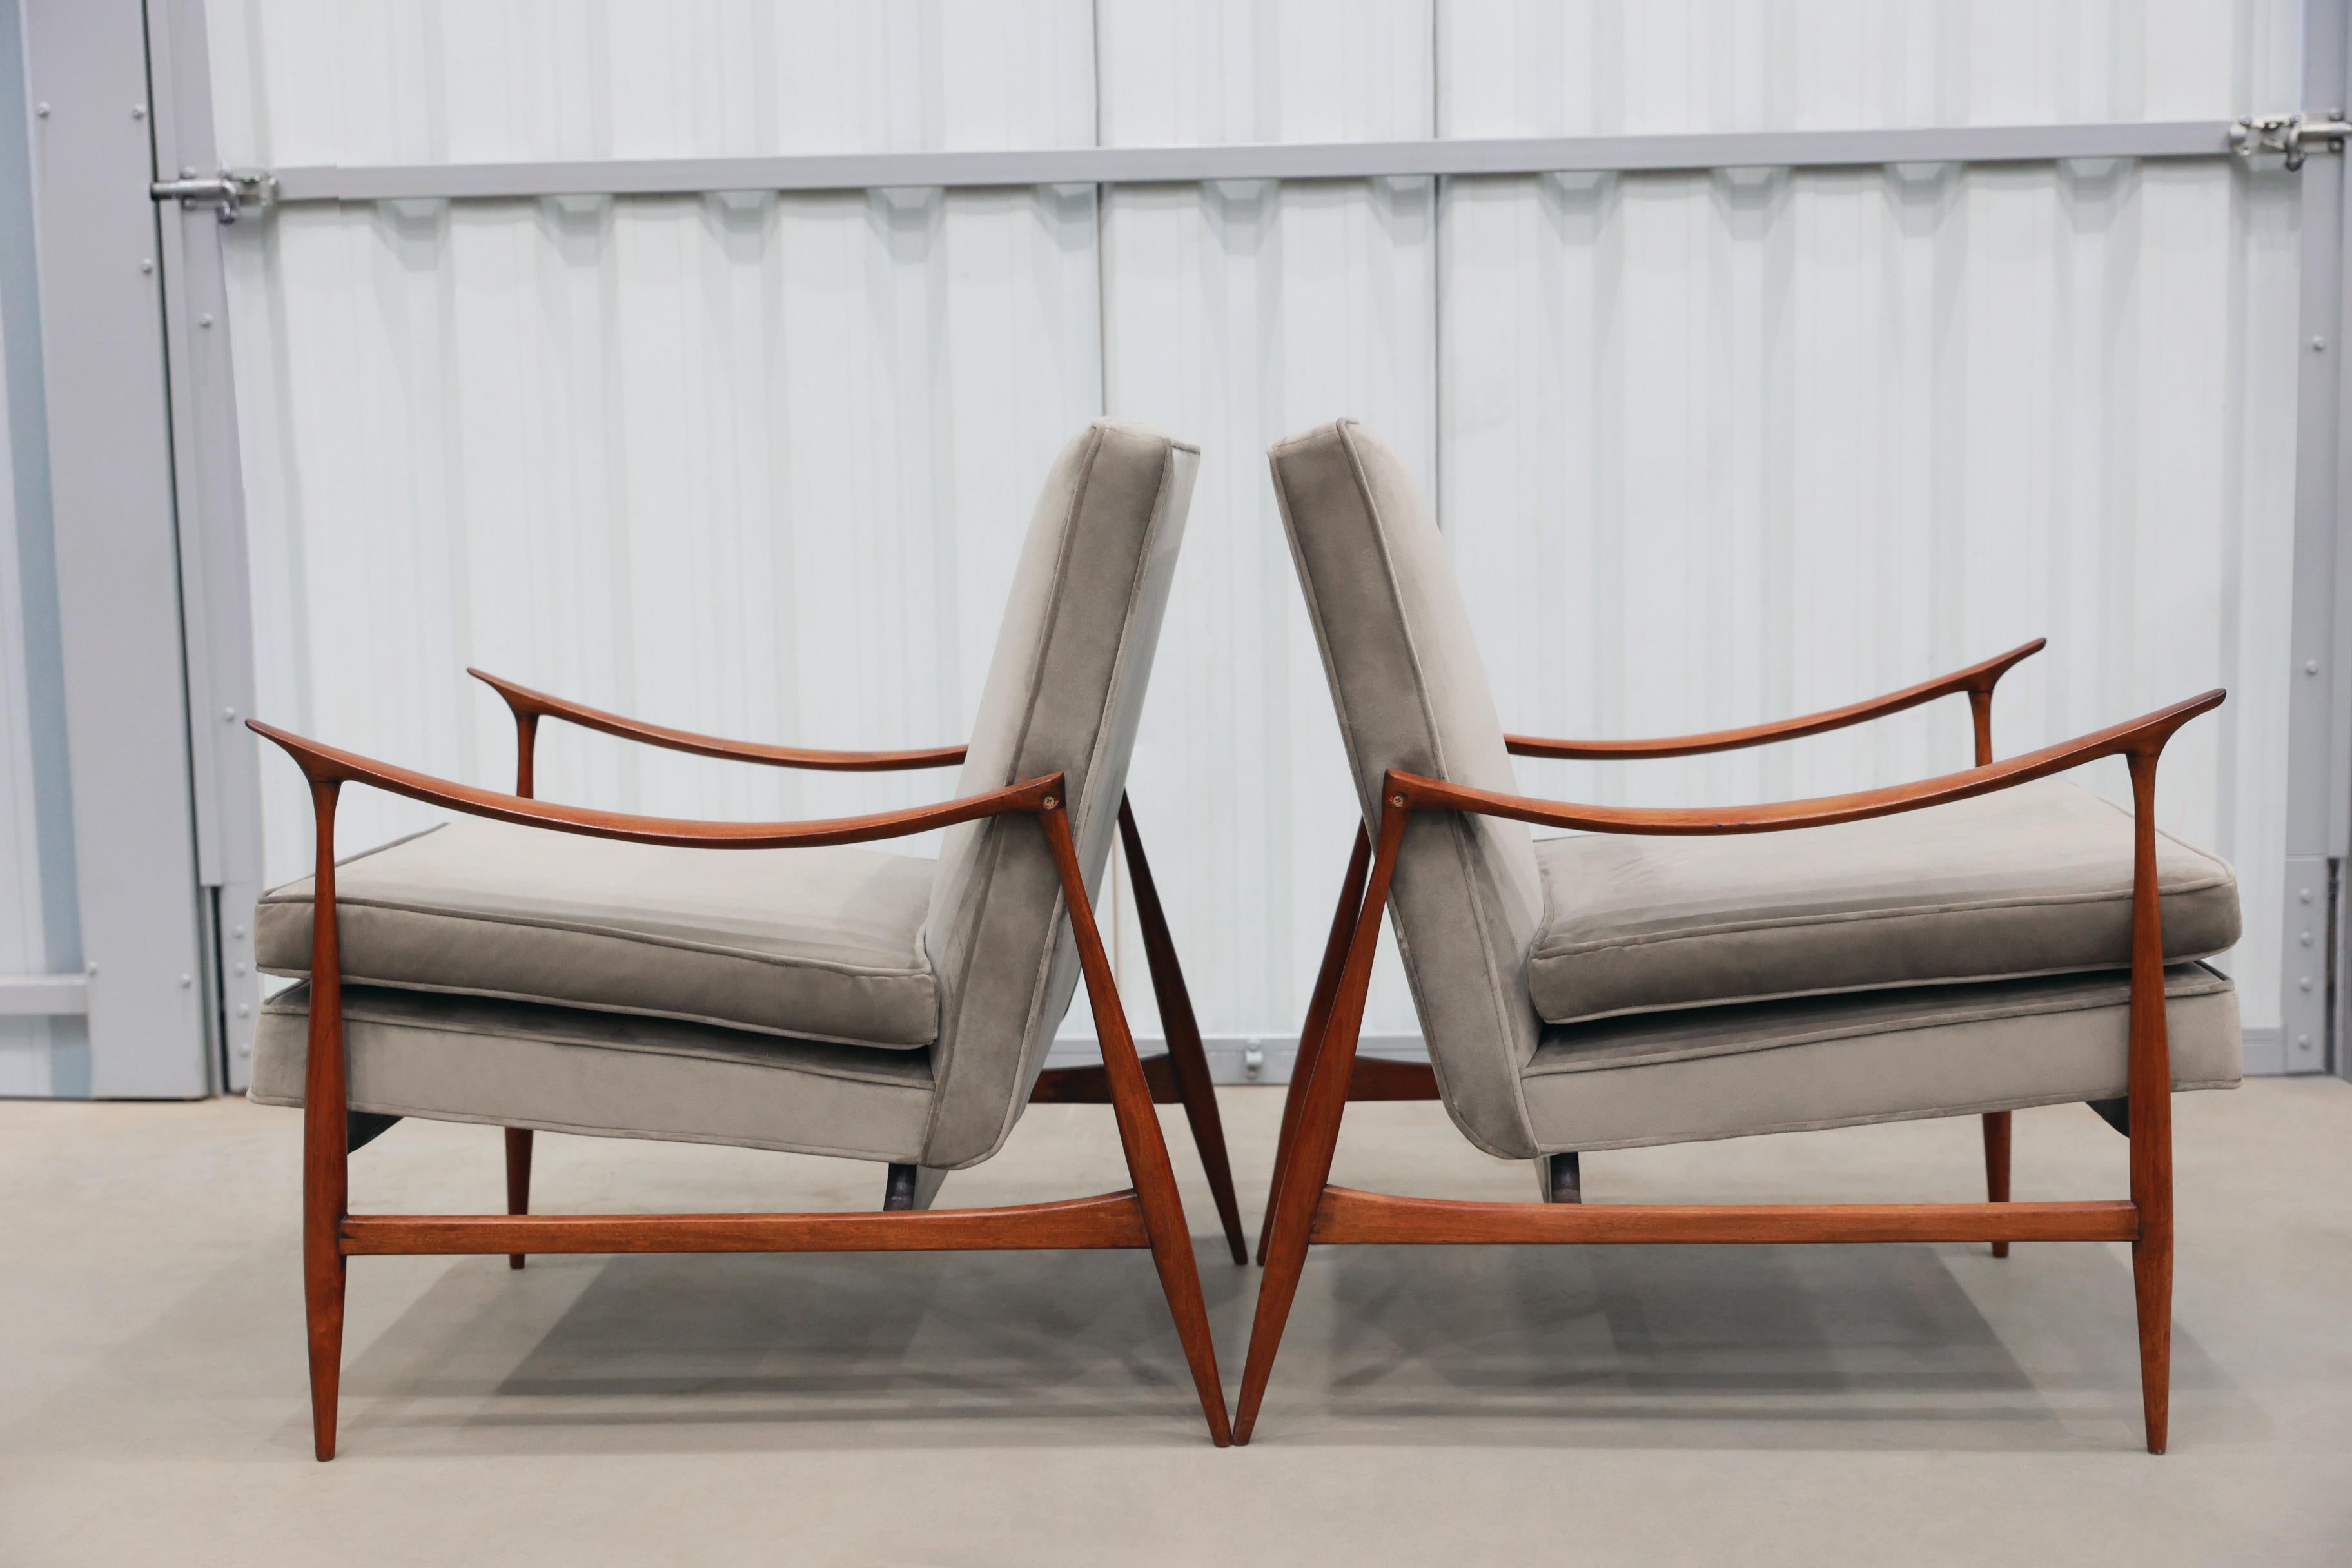 Brazilian Modern Armchairs in Hardwood & Brown Fabric, Jorge Zalszupin, c. 1950s In Good Condition For Sale In New York, NY